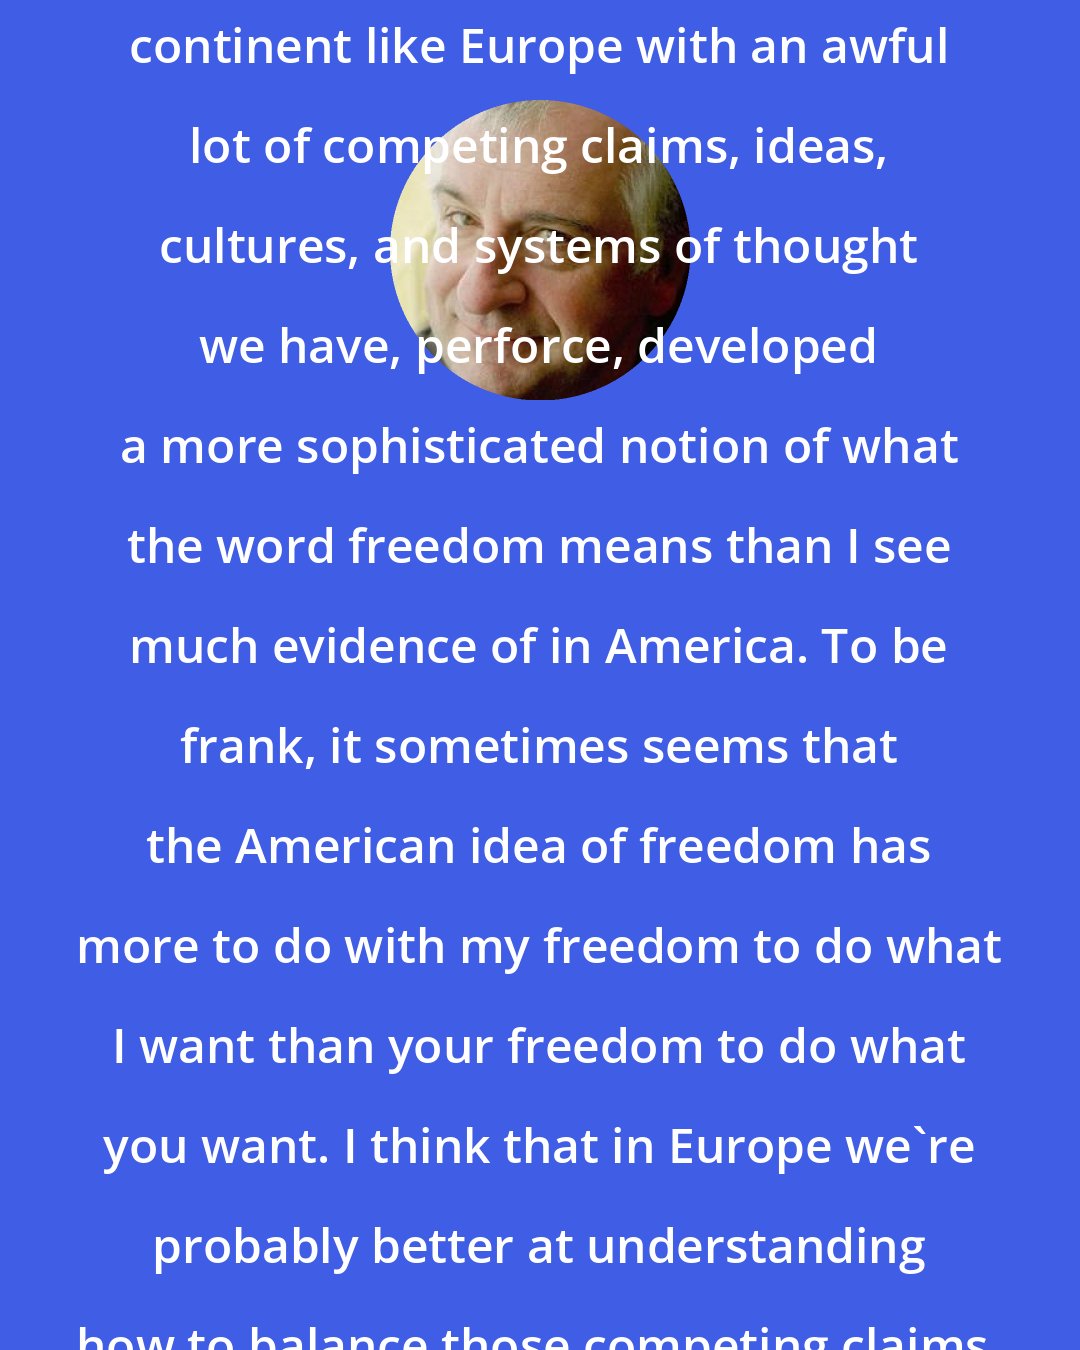 Douglas Adams: I think that growing up in a crowded continent like Europe with an awful lot of competing claims, ideas, cultures, and systems of thought we have, perforce, developed a more sophisticated notion of what the word freedom means than I see much evidence of in America. To be frank, it sometimes seems that the American idea of freedom has more to do with my freedom to do what I want than your freedom to do what you want. I think that in Europe we're probably better at understanding how to balance those competing claims, though not a lot.